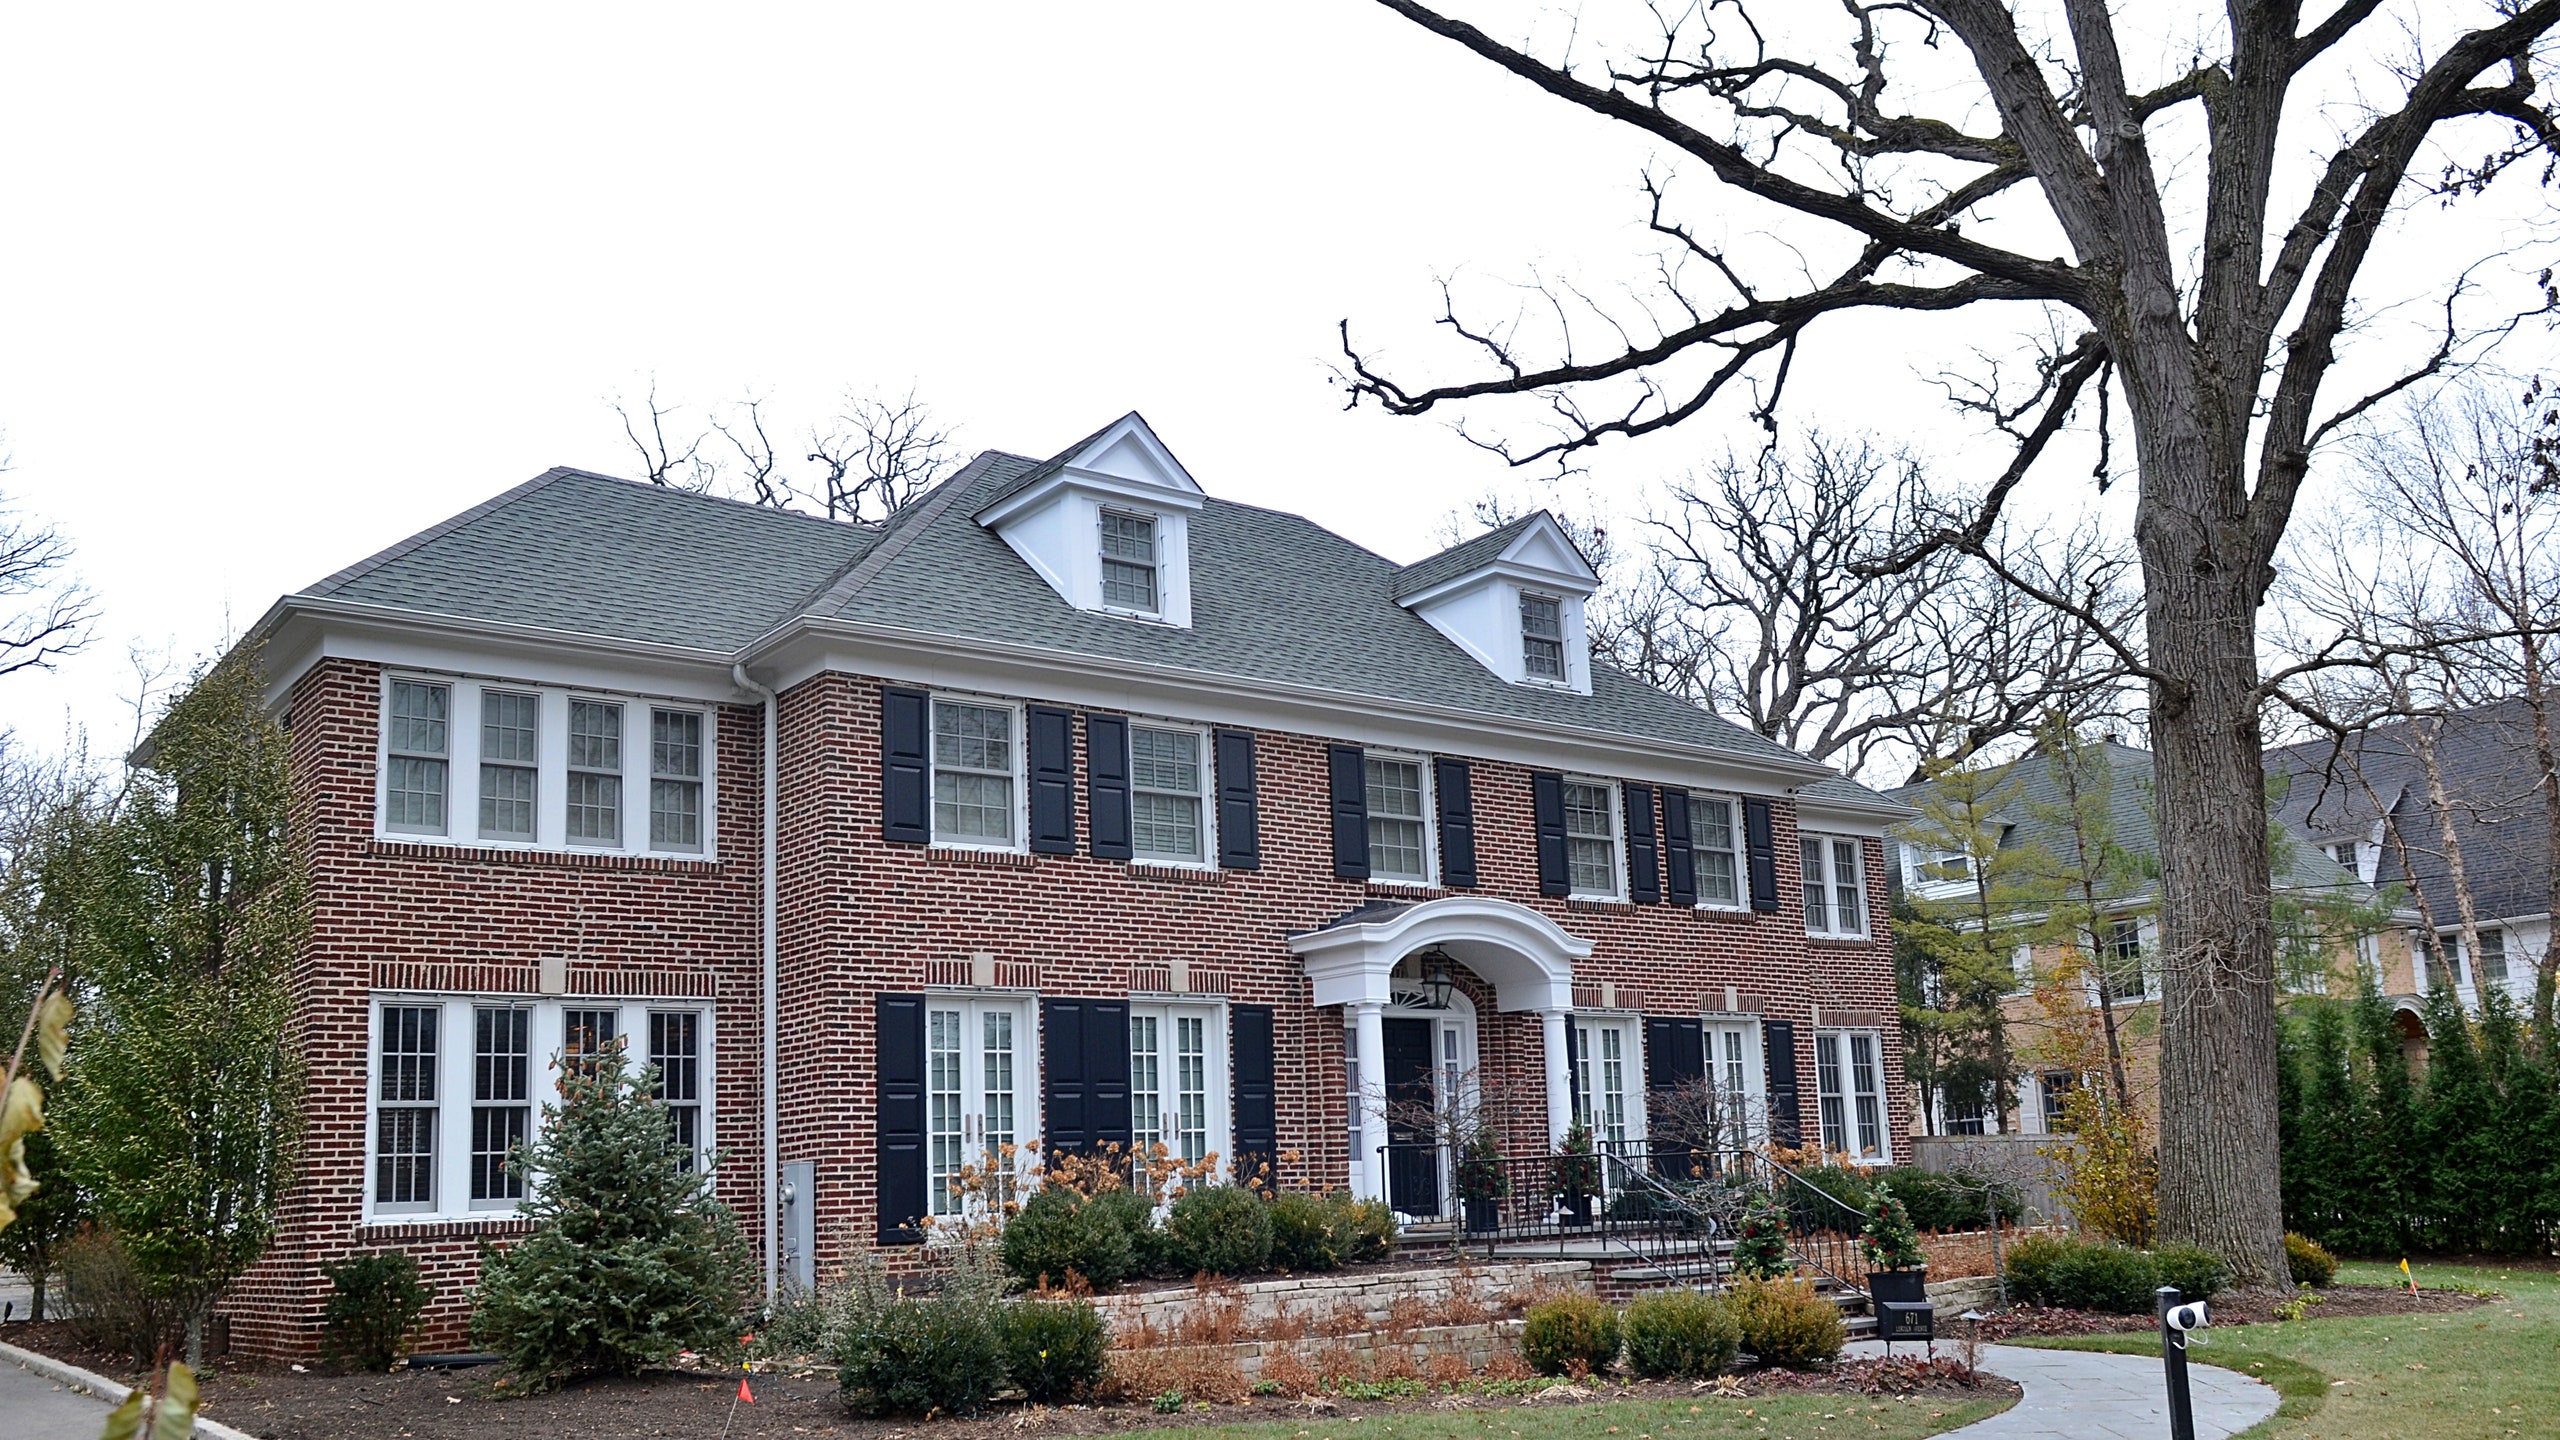 Everything You've Ever Wondered About the Home Alone House